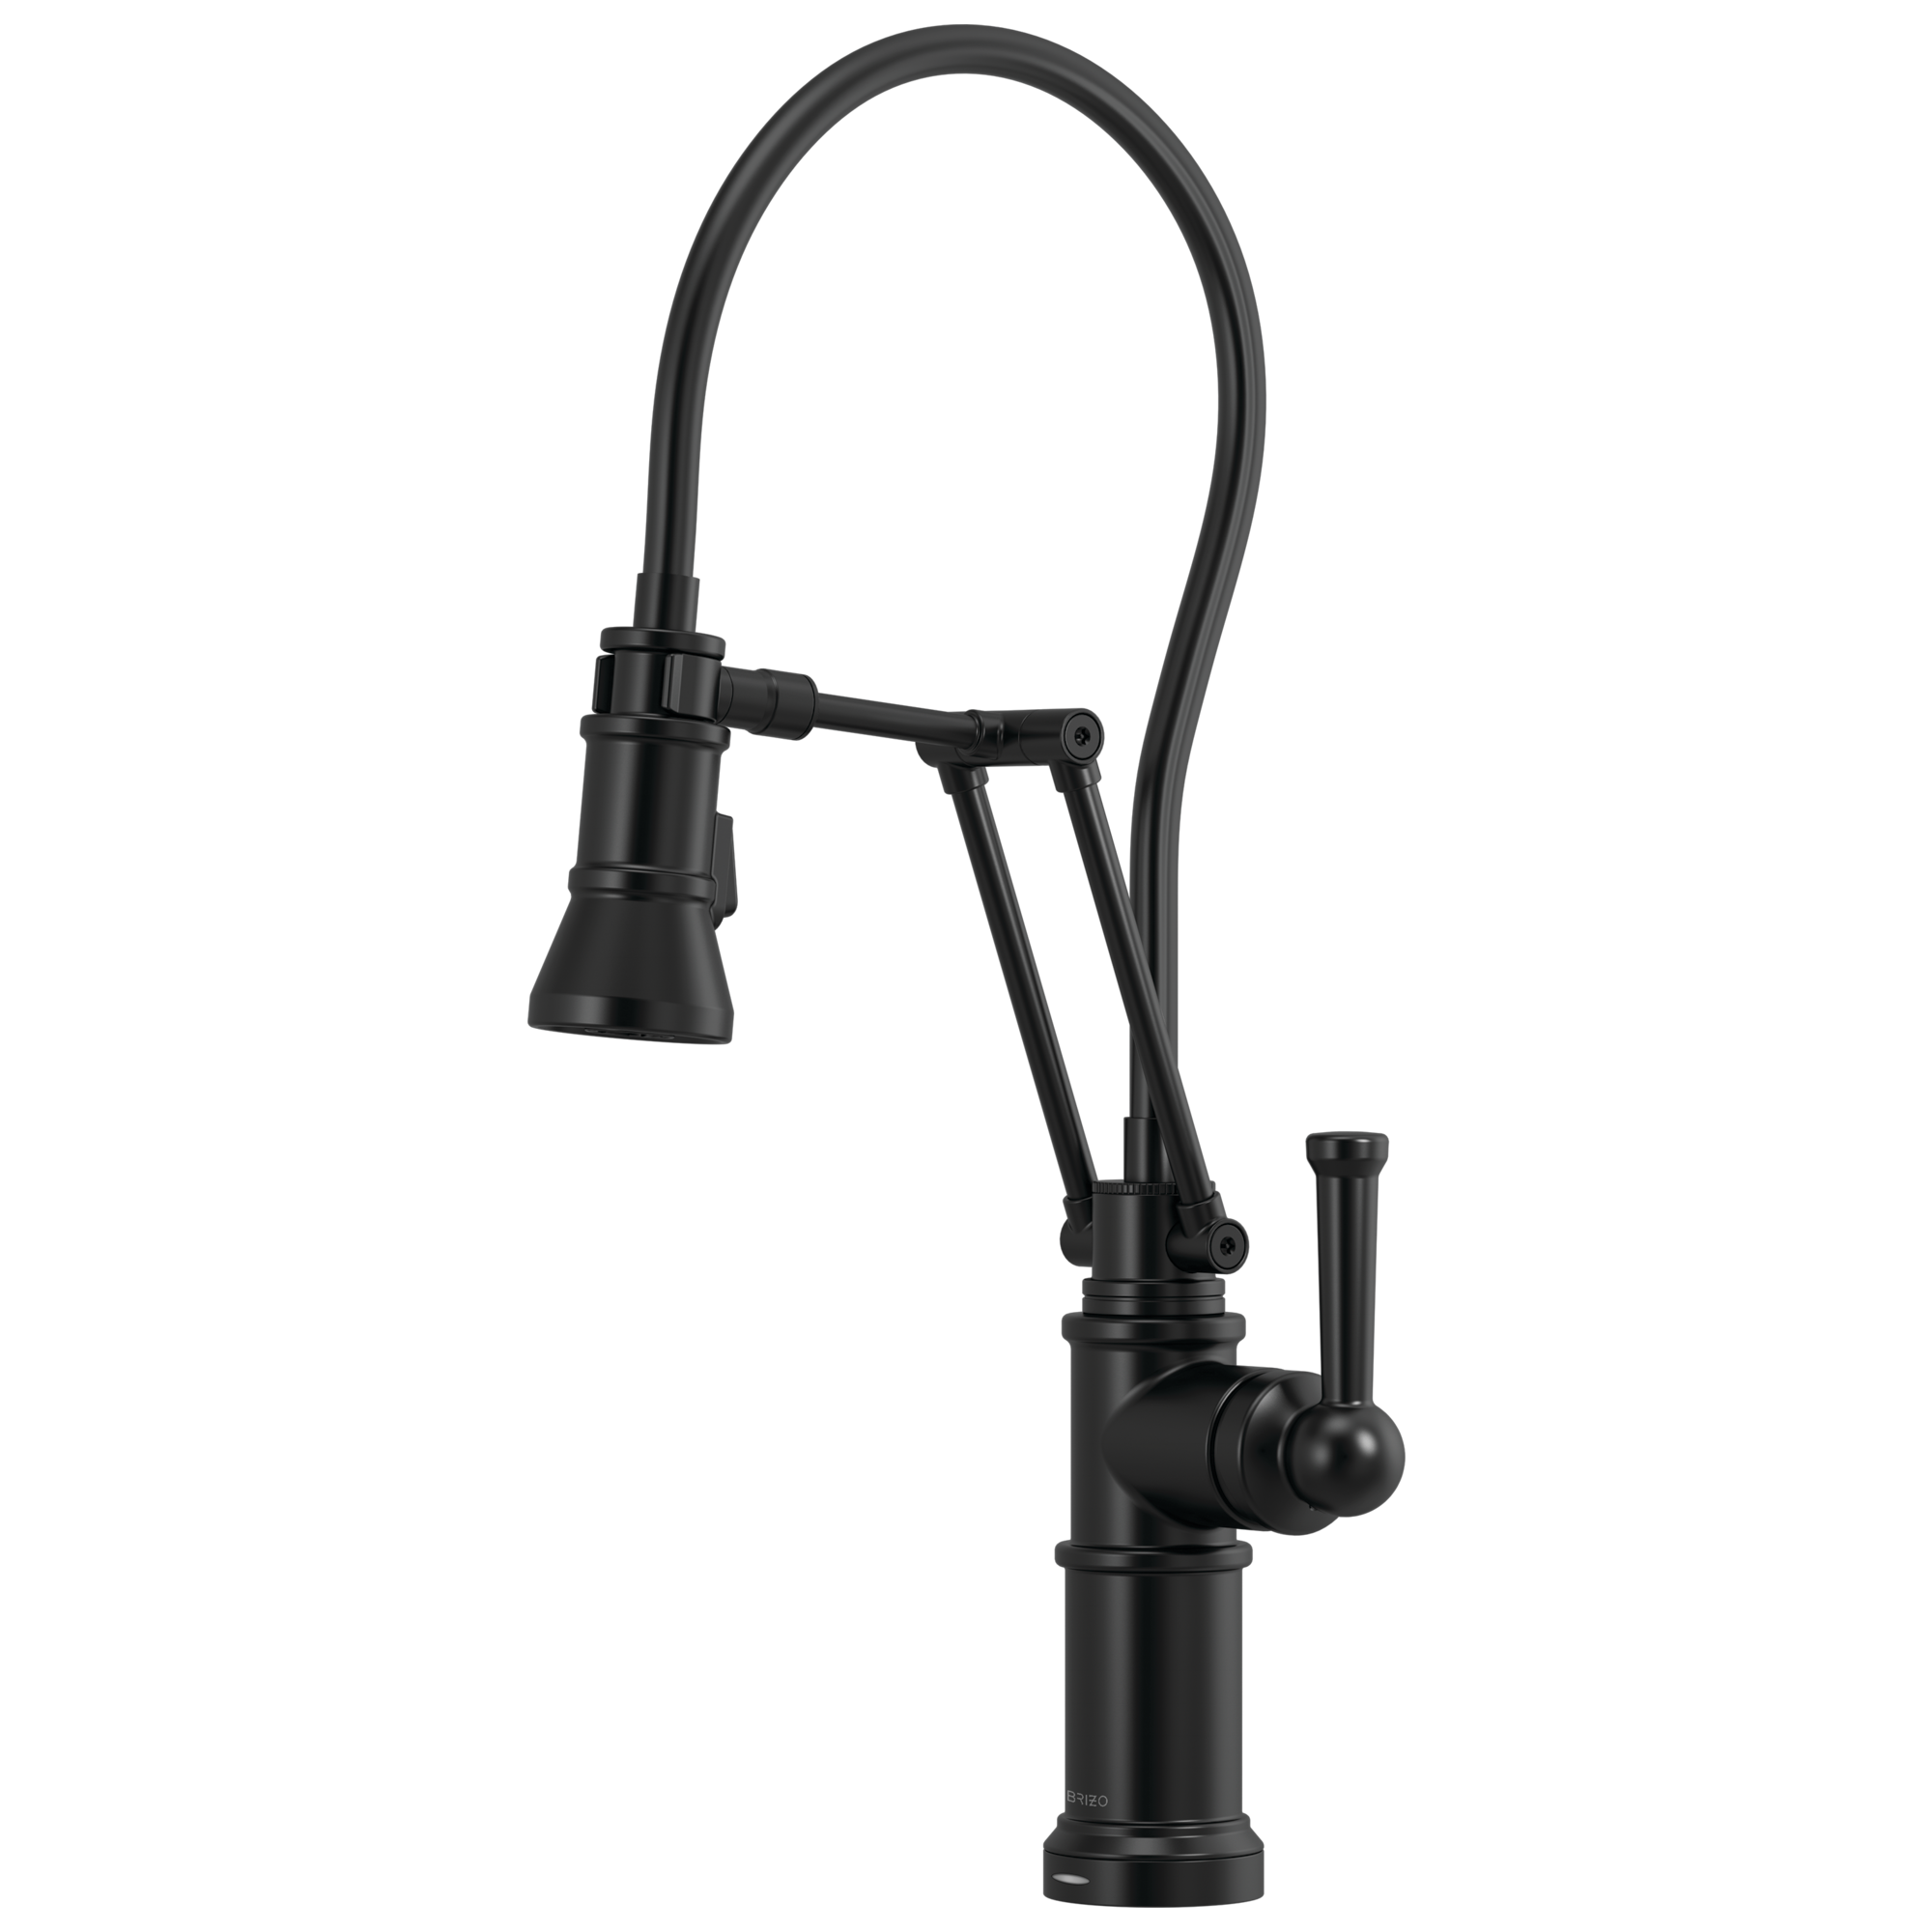 Brizo Artesso Single Handle Articulating Kitchen Faucet with Smart Touch Technology